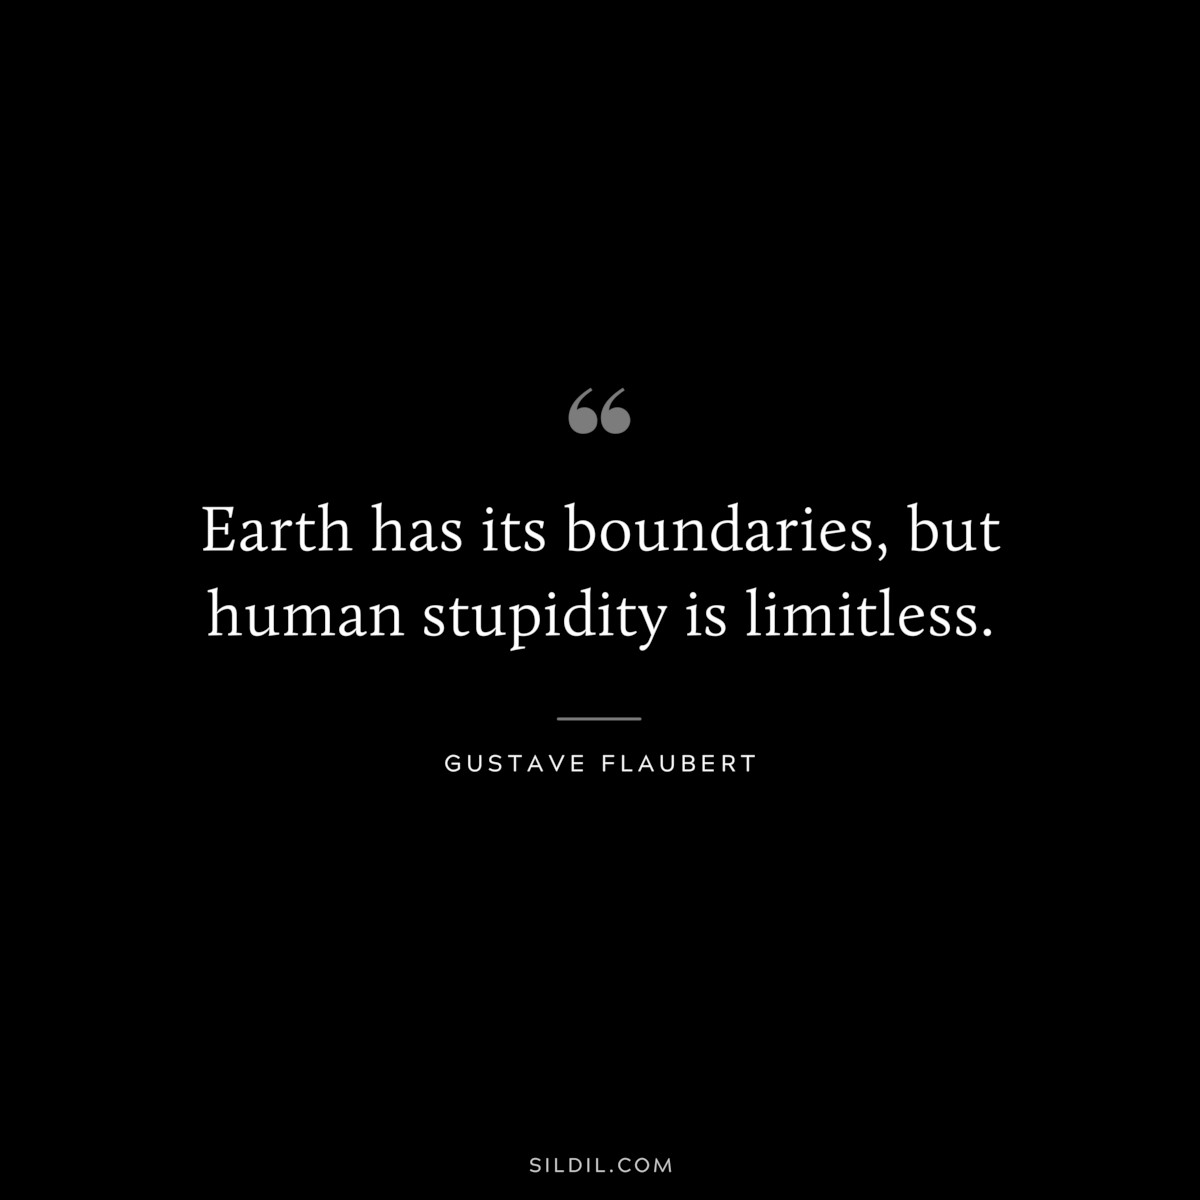 Earth has its boundaries, but human stupidity is limitless. ― Gustave Flaubert